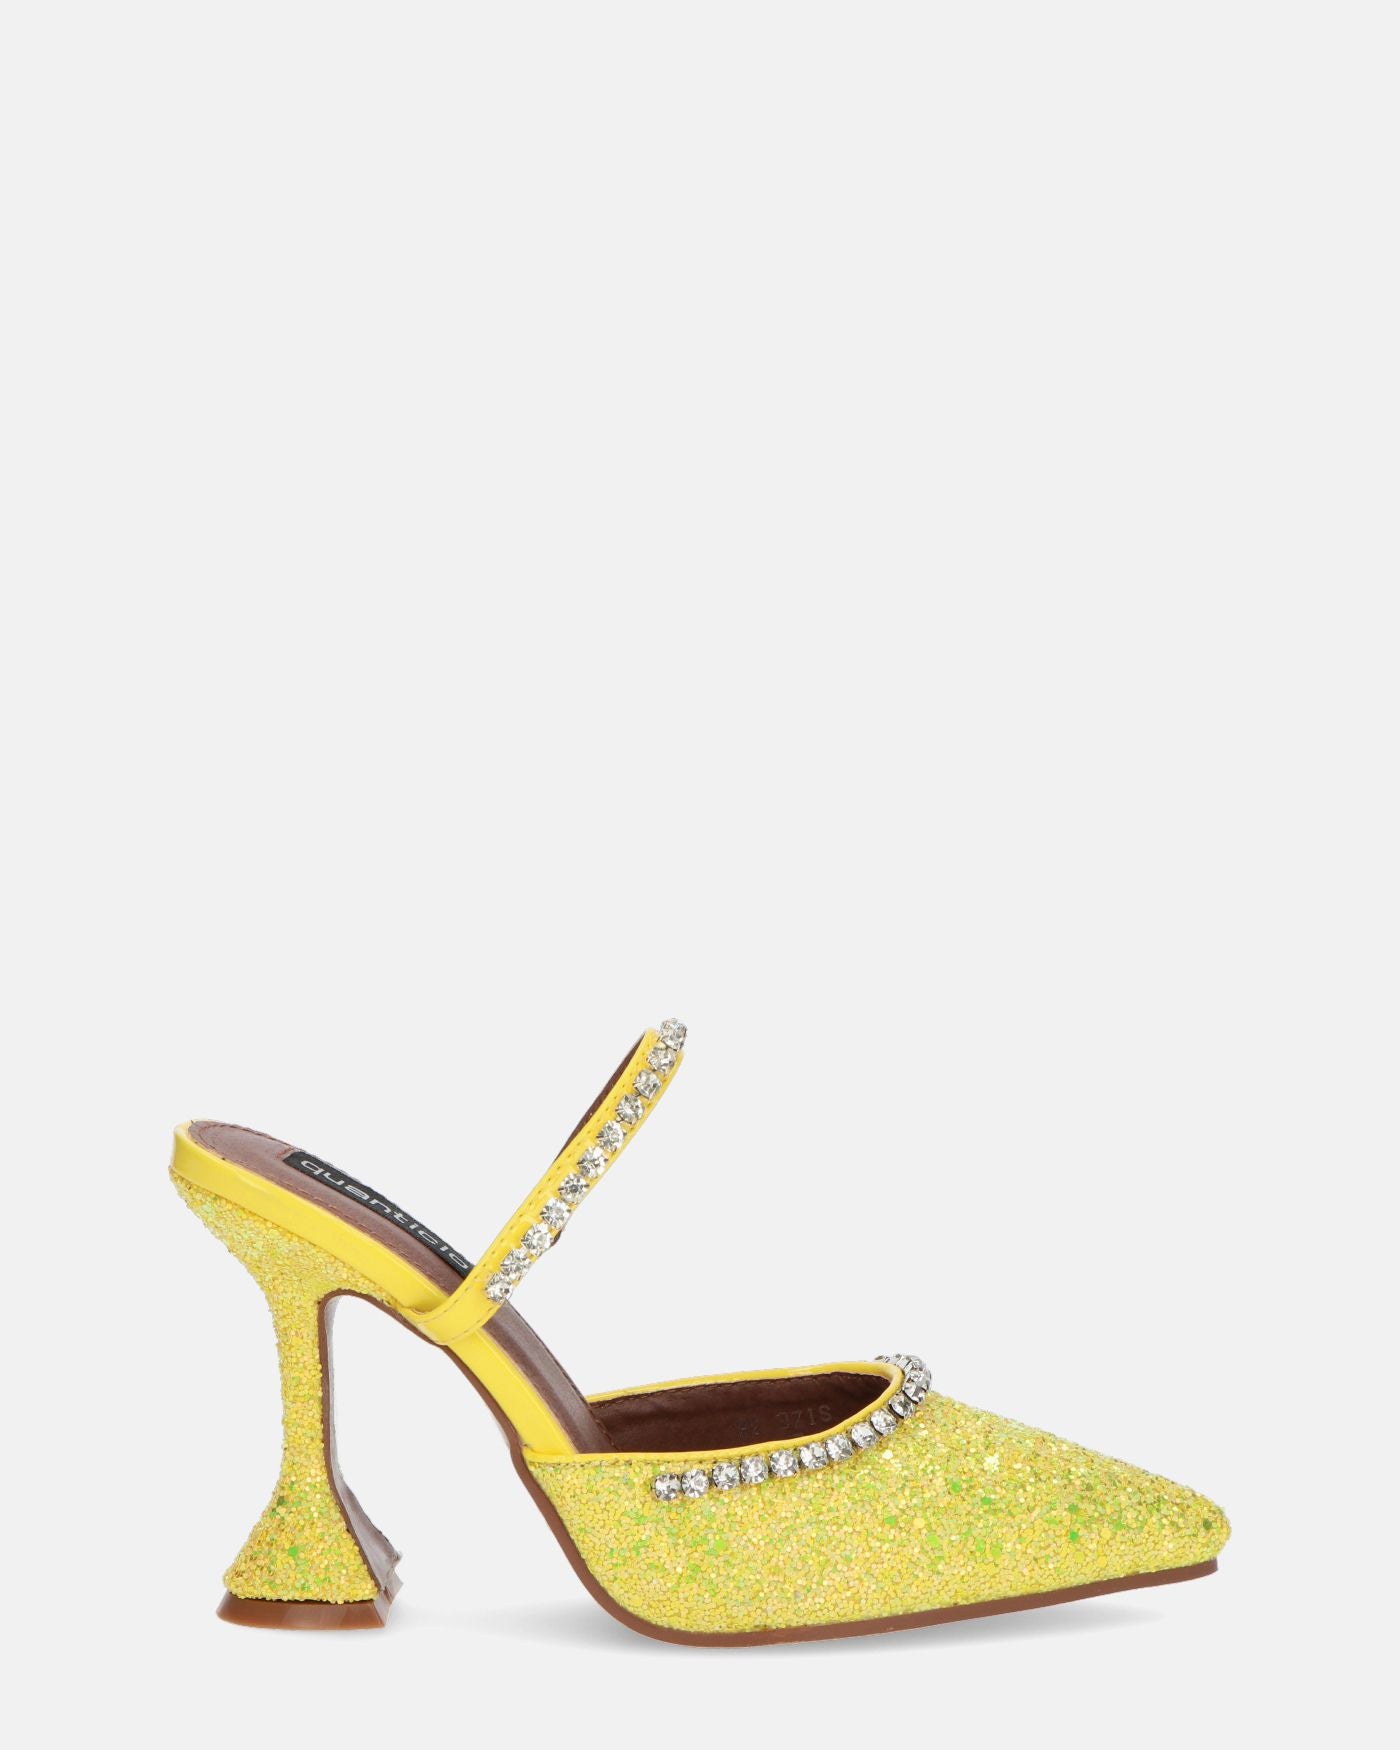 PERAL - heeled shoe in yellow glitter with gems